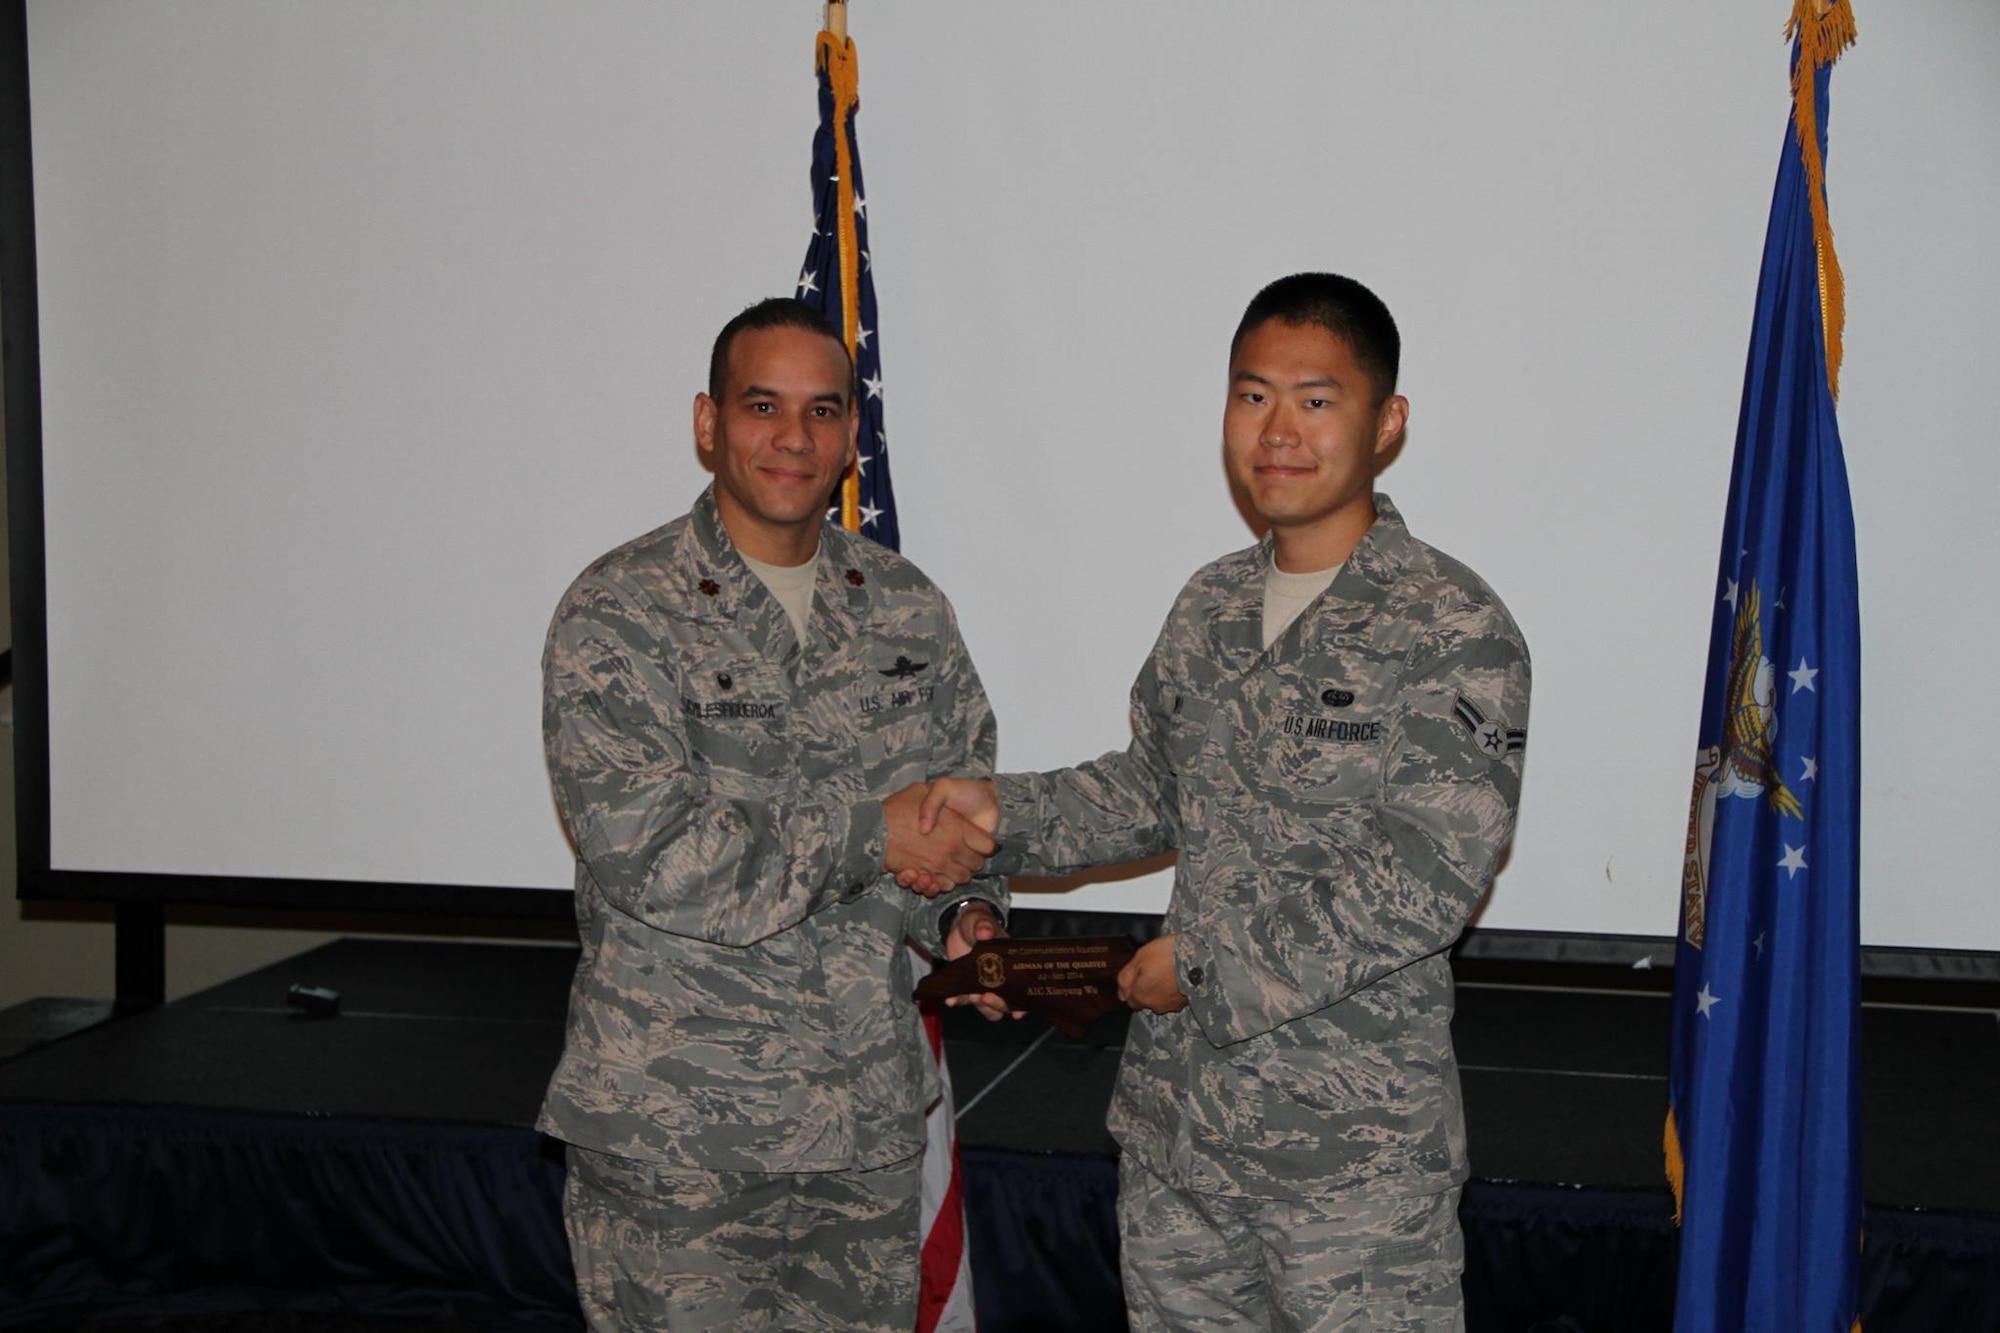 Maj. Nelson “AV” Avilesfigueroa, 4th Communications Squadron commander, presents Airman 1st Class Xiaoyang Wu, 4th CS assistant administrator, with an Airman of the Quarter award Oct. 23, 2014, at Seymour Johnson Air Force Base, North Carolina. AV inspired Wu to earn a computer science degree and go to Air Force Reserve Officer Training Corps (AFROTC). Now 1st Lt. Xiaoyang Wu, is a Joint Mission Operations Center watch officer for the 367th Cyberspace Operations Squadron, at JBSA-Lackland, Texas.